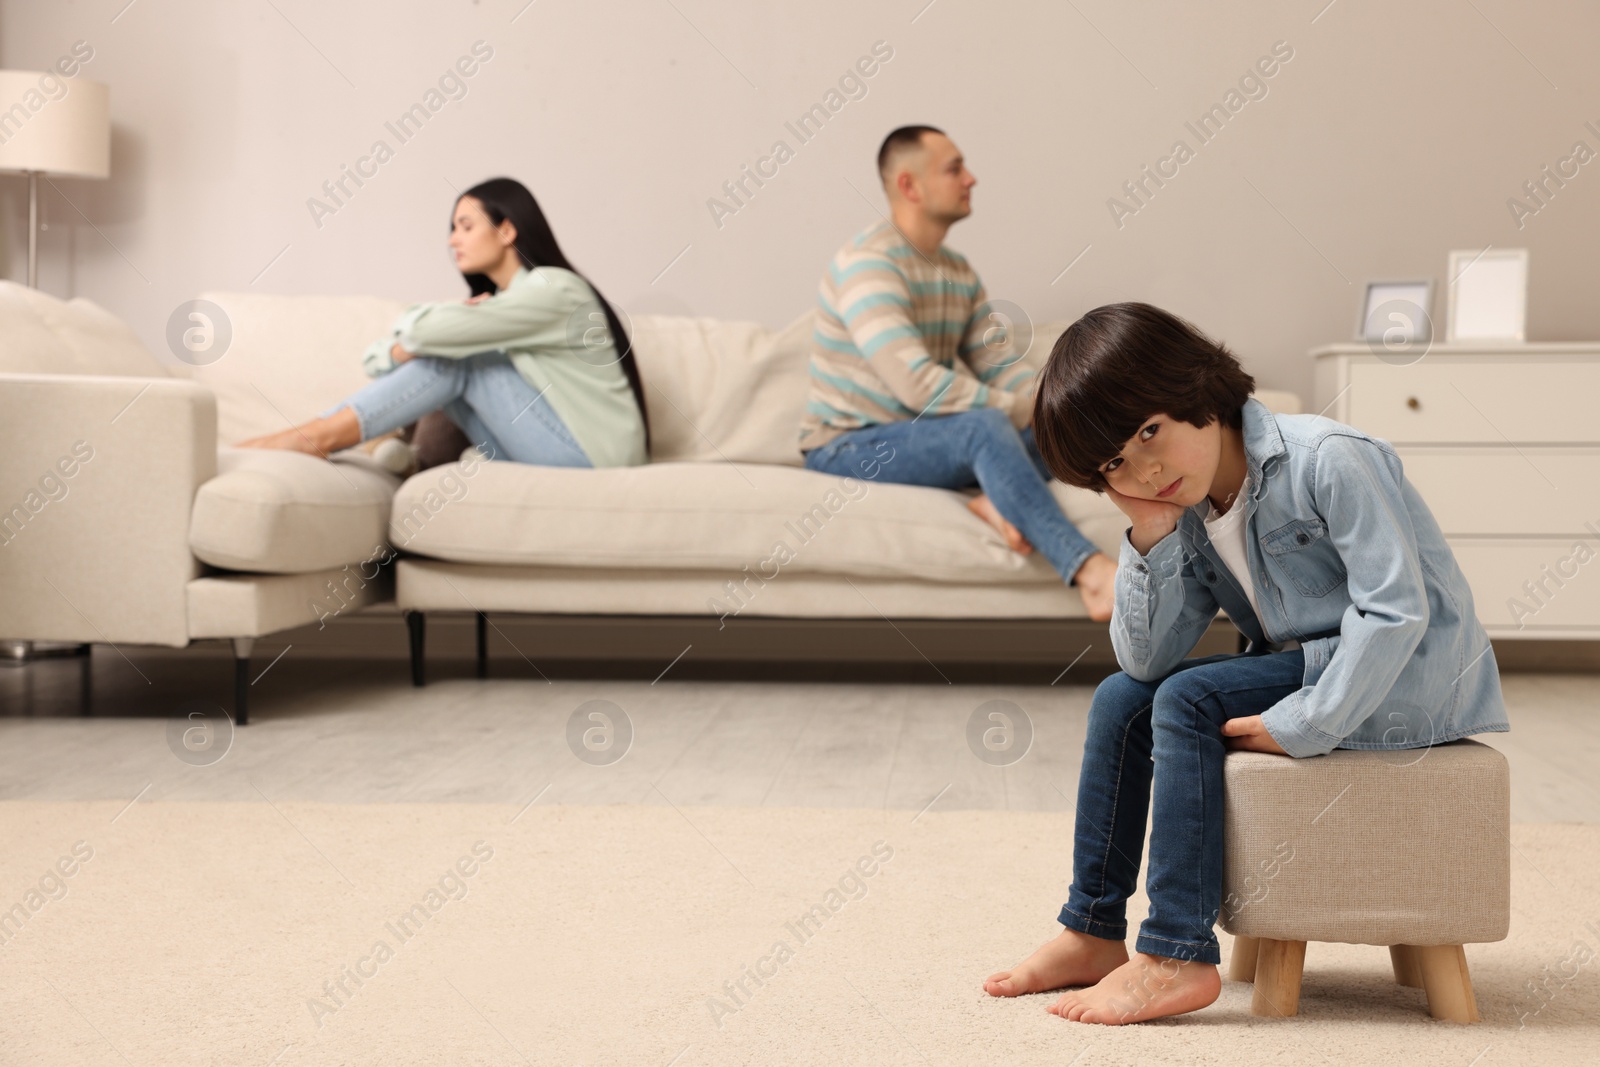 Photo of Sad couple with relationship problems at home, focus on their upset child